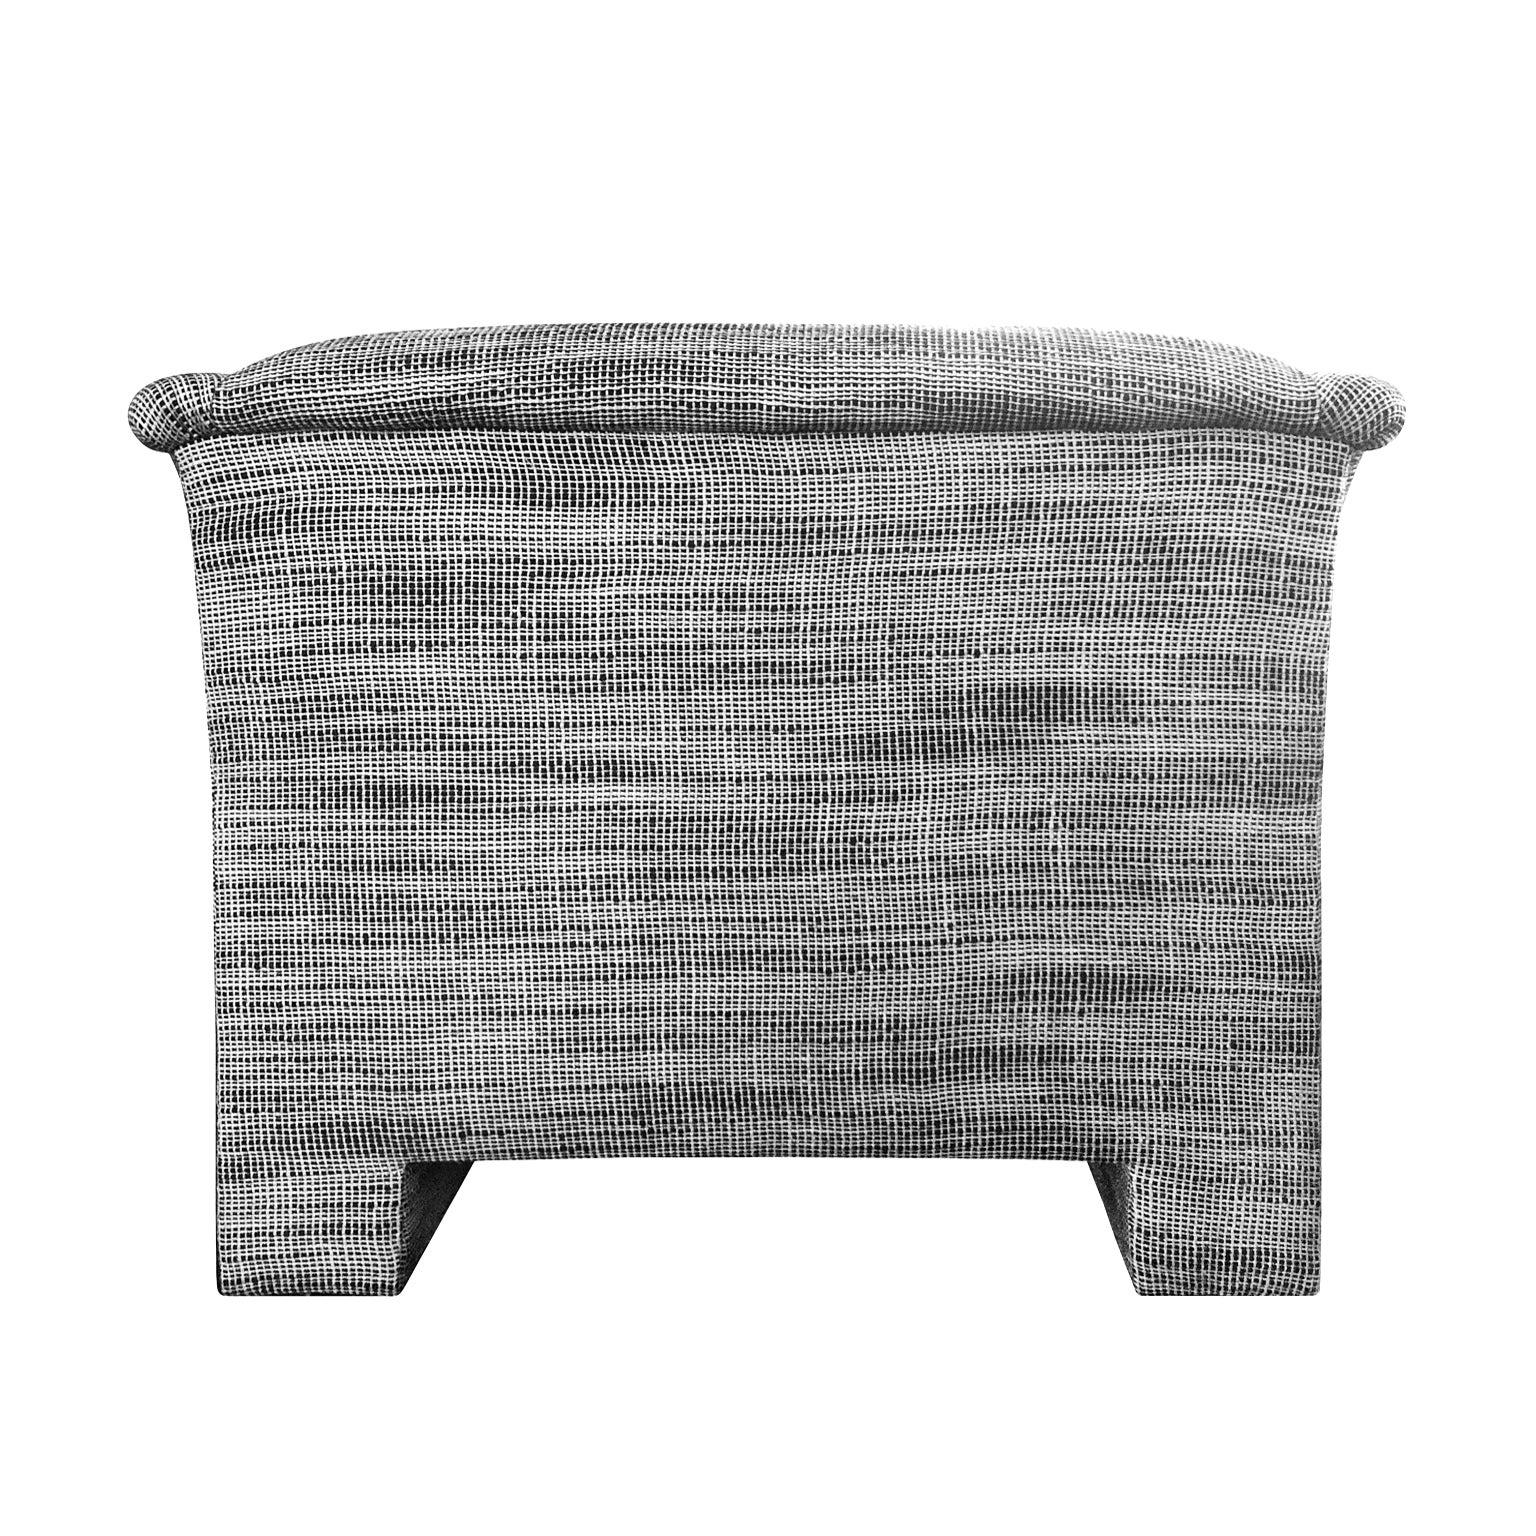 Italian 1970s Modernist Lounge Chair in Black and White Wool Basketweave Upholstery